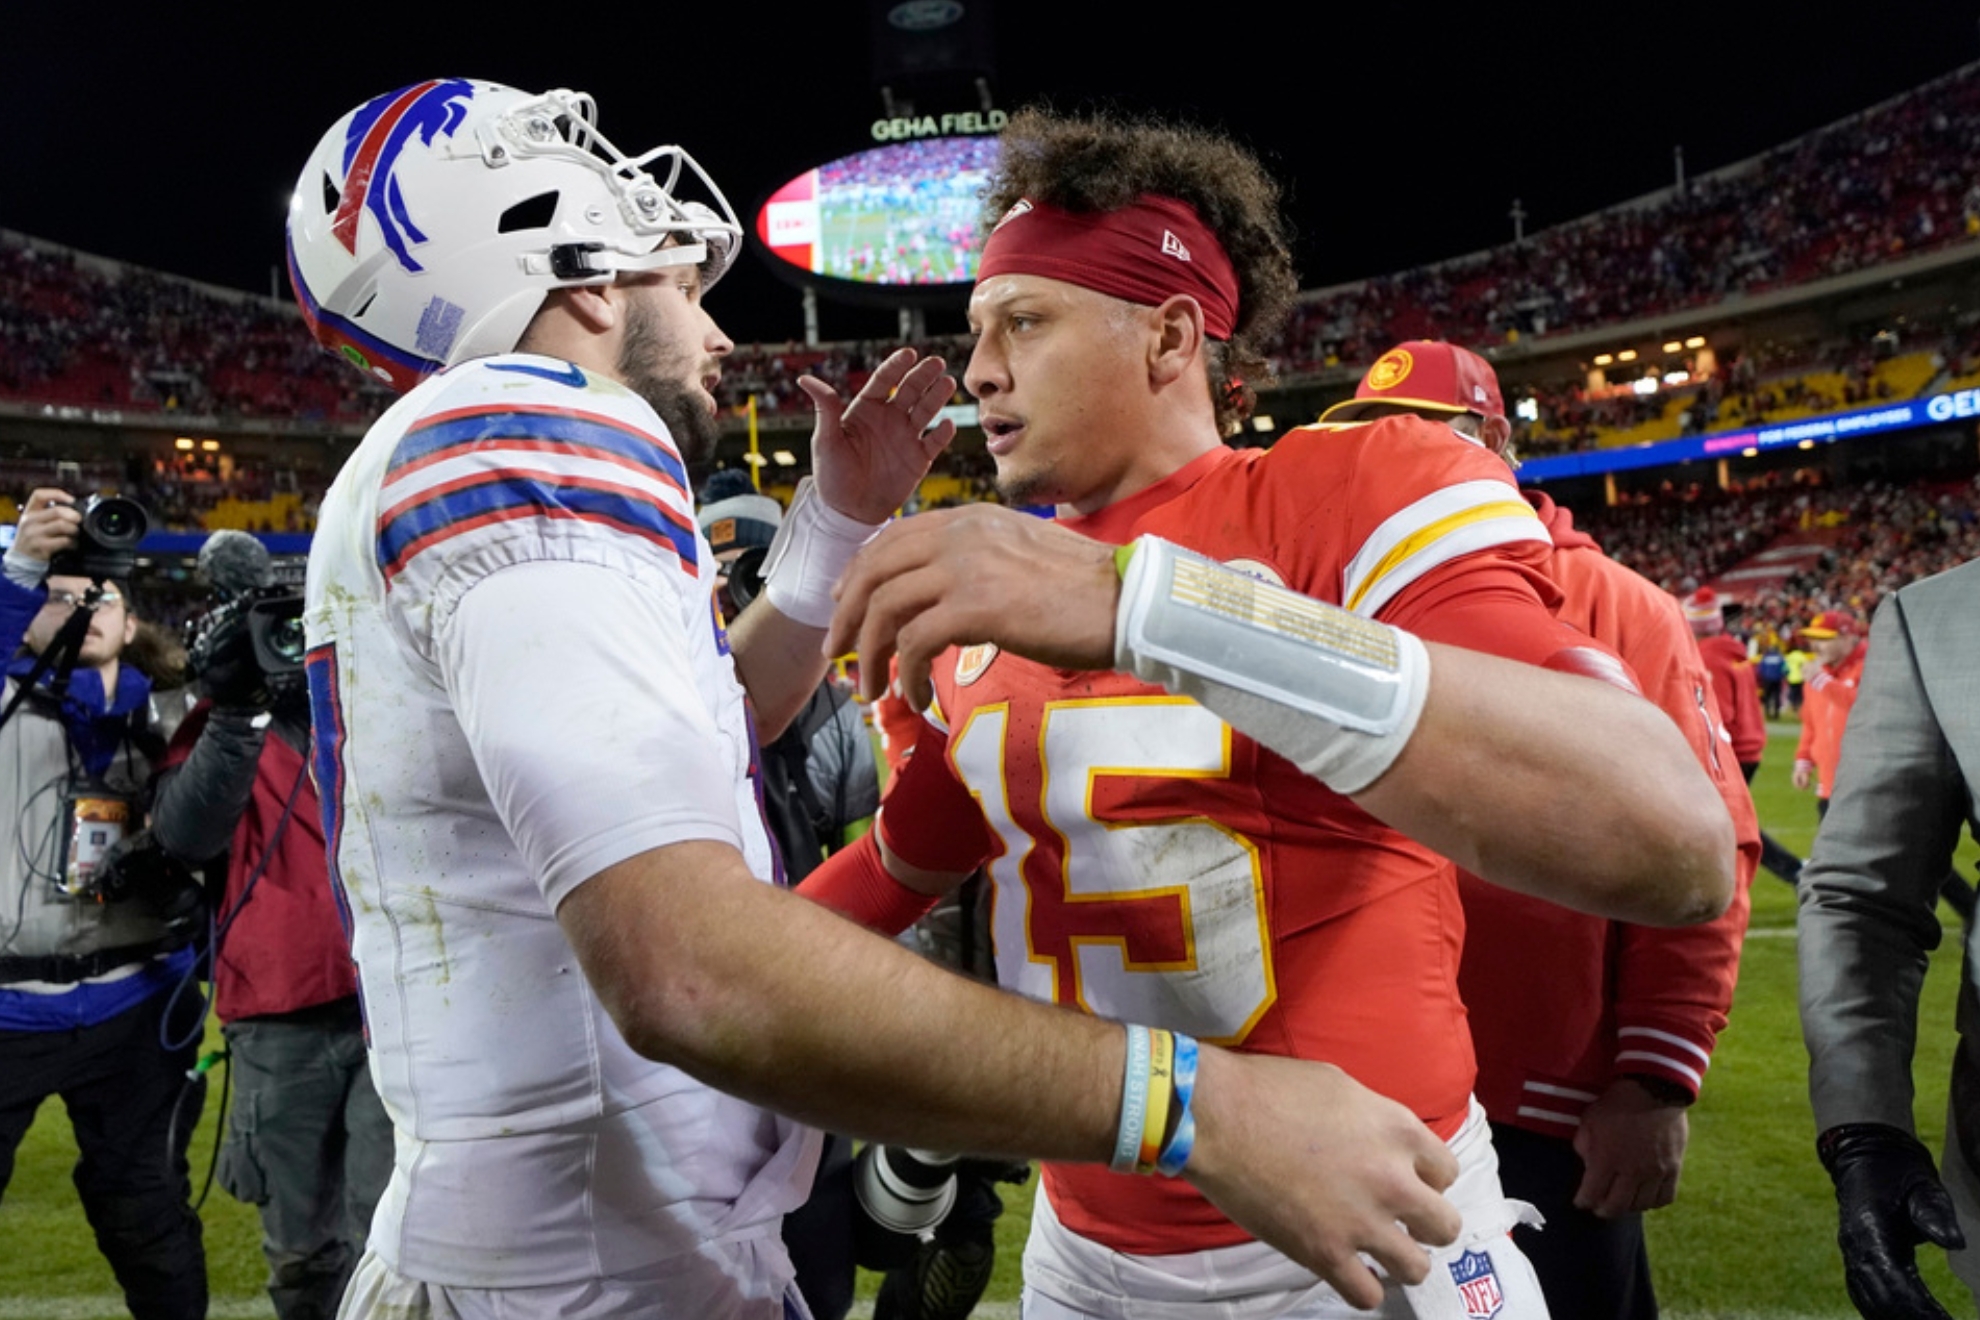 Mahomes and Allen will add another chapter to their playoff rivalry